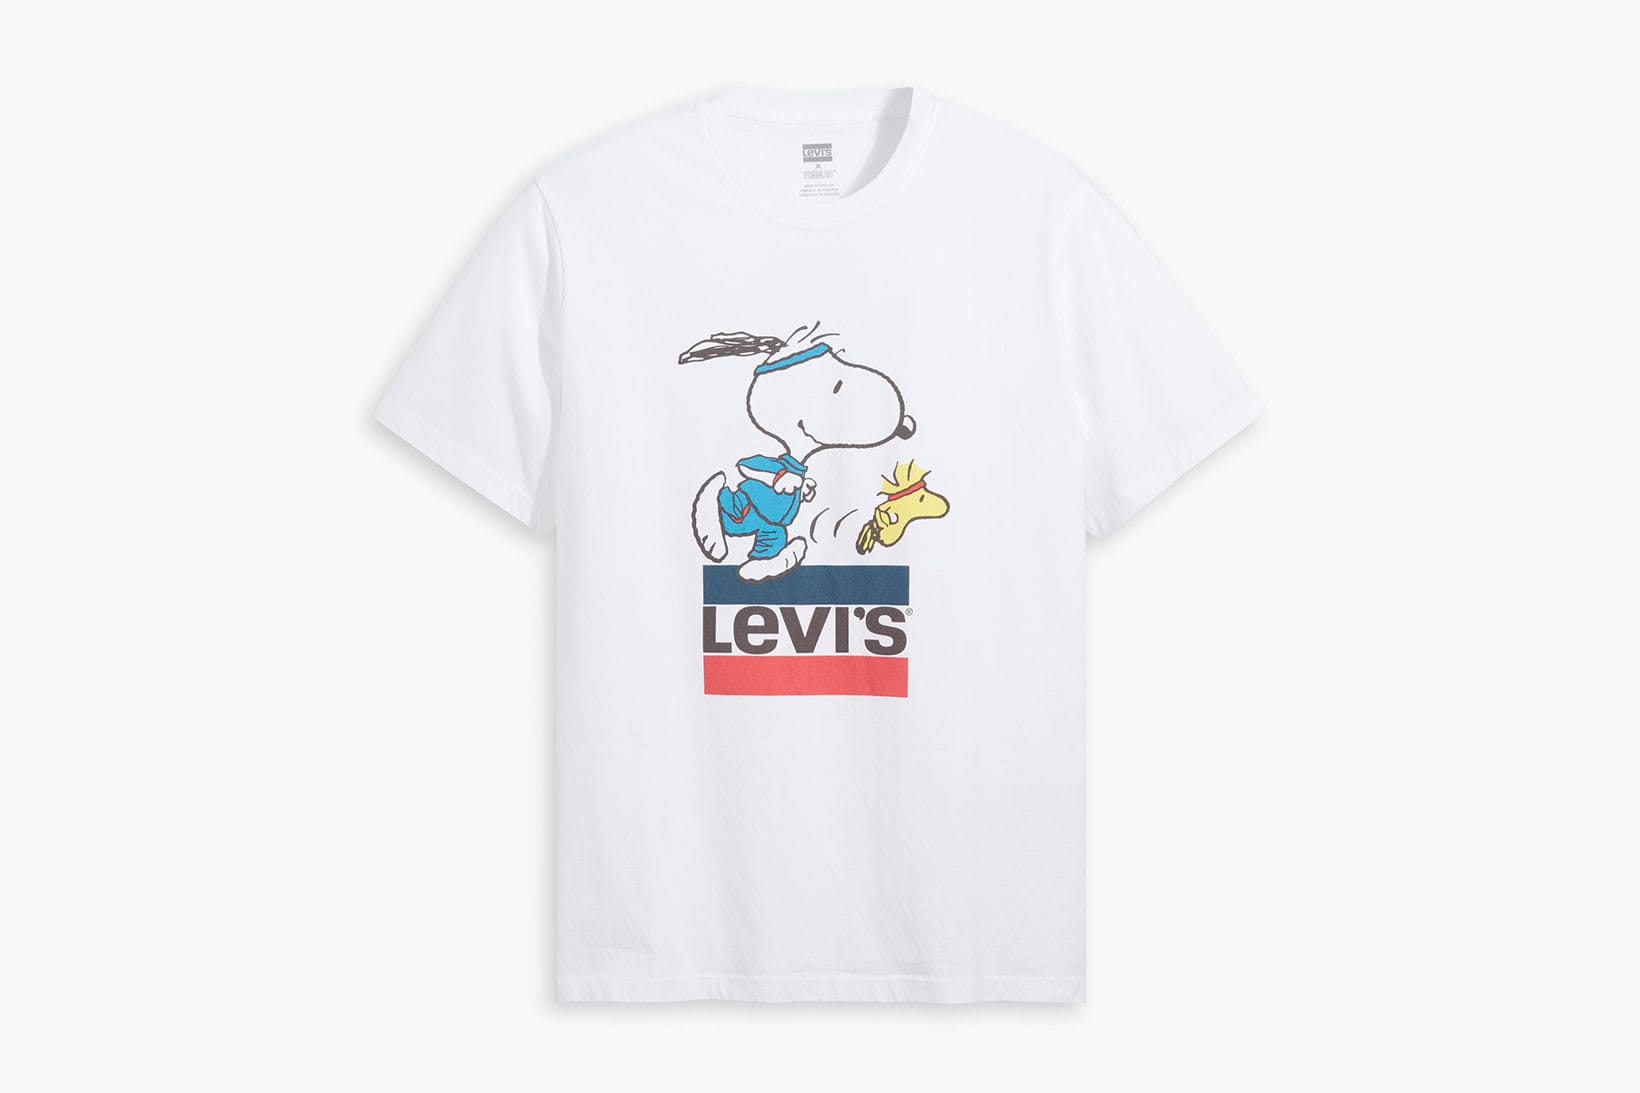 levis and peanuts